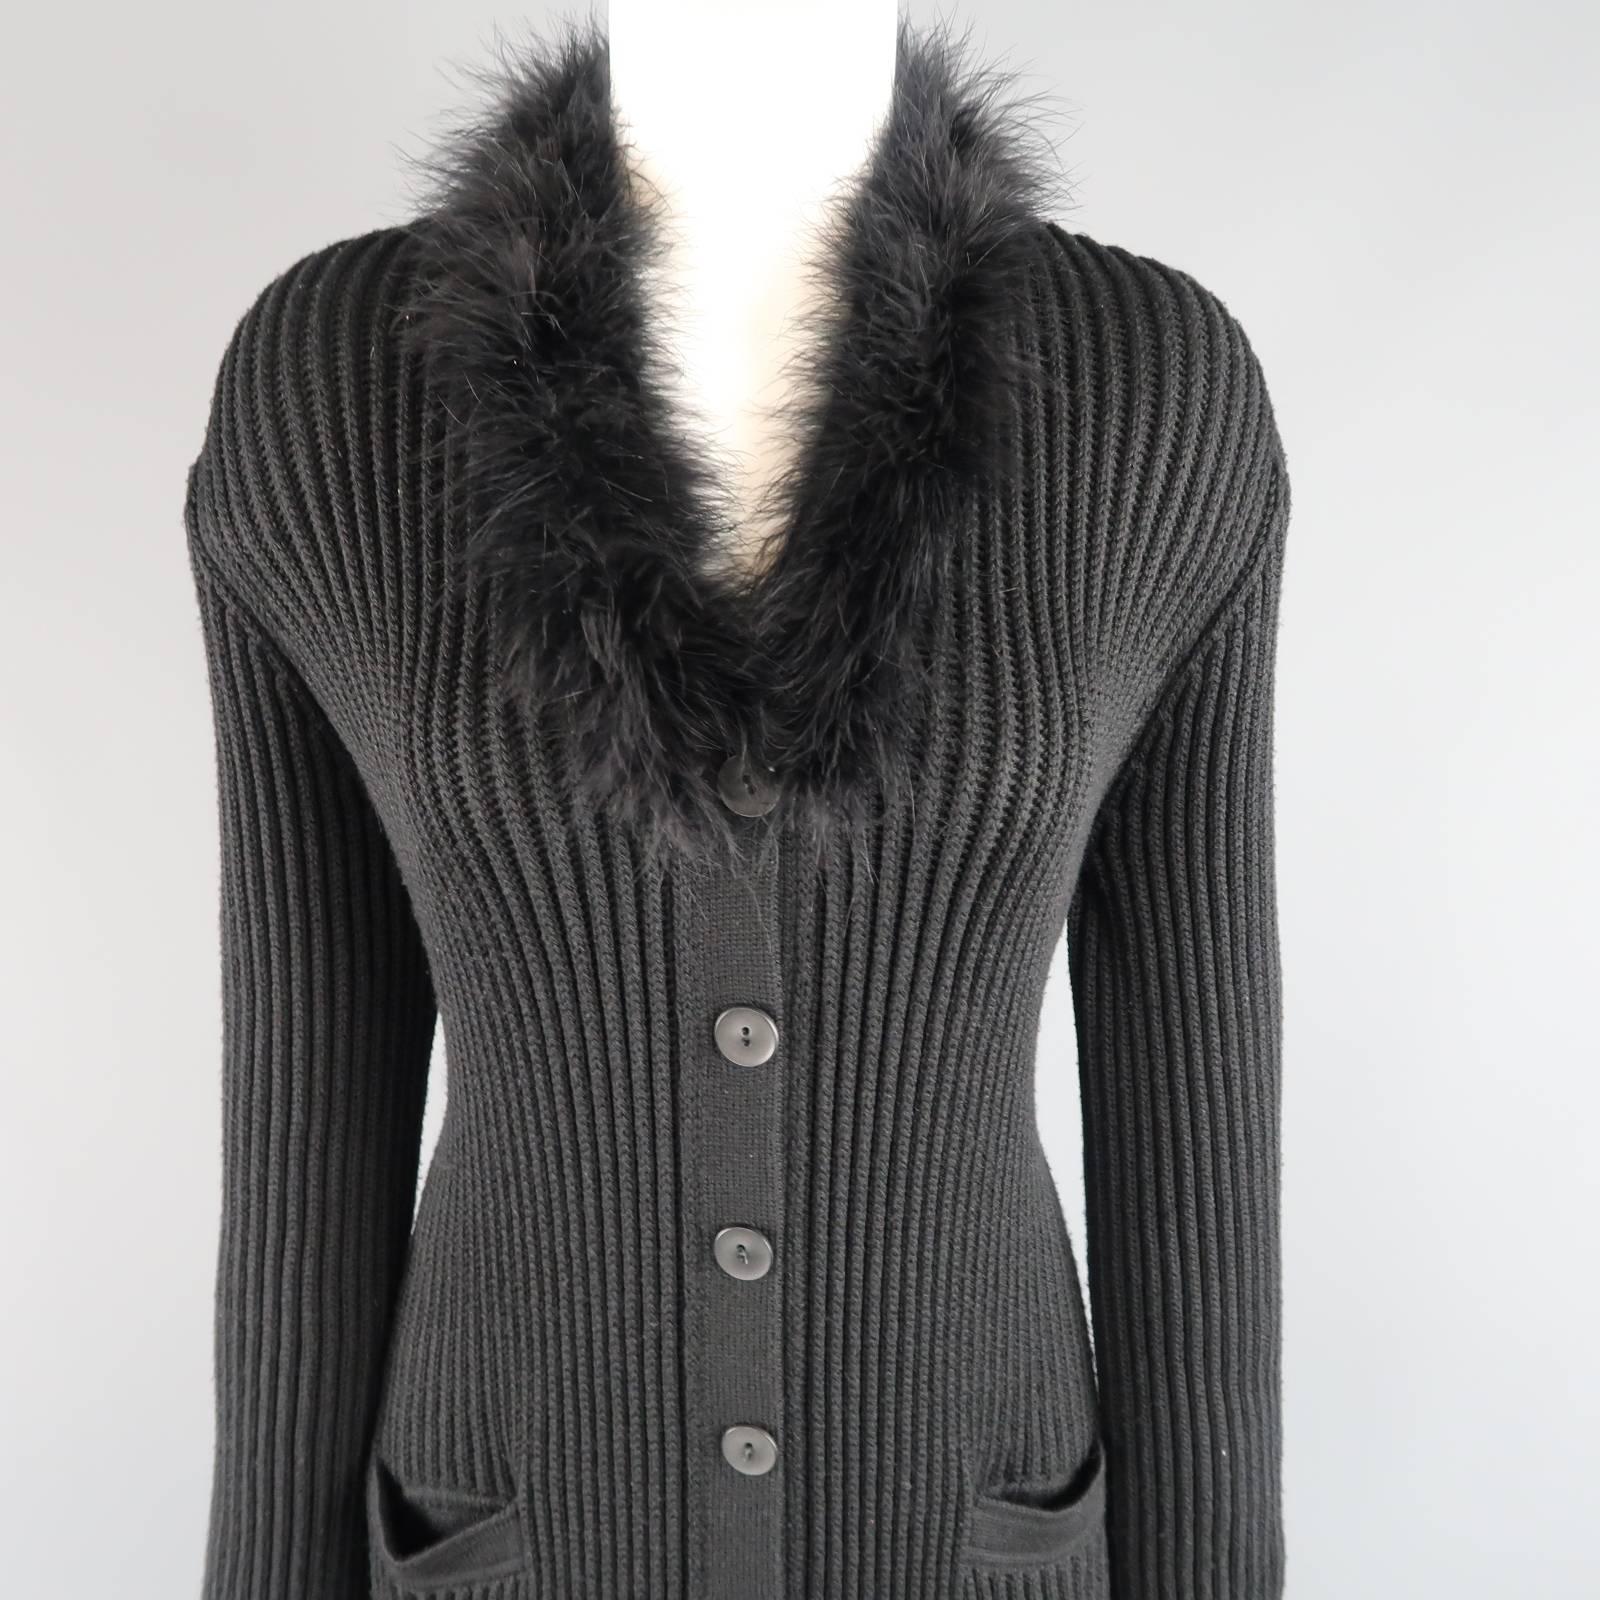 GIORGIO ARMANI extra long cardigan coat comes in a wool silk blend ribbed knit and features a V neckline with feather boa trim. Wear throughout. Made in Italy.
 
Good Pre-Owned Condition.
Marked: IT 44
 
Measurements:
 
Shoulder: 17 in.
Bust: 40